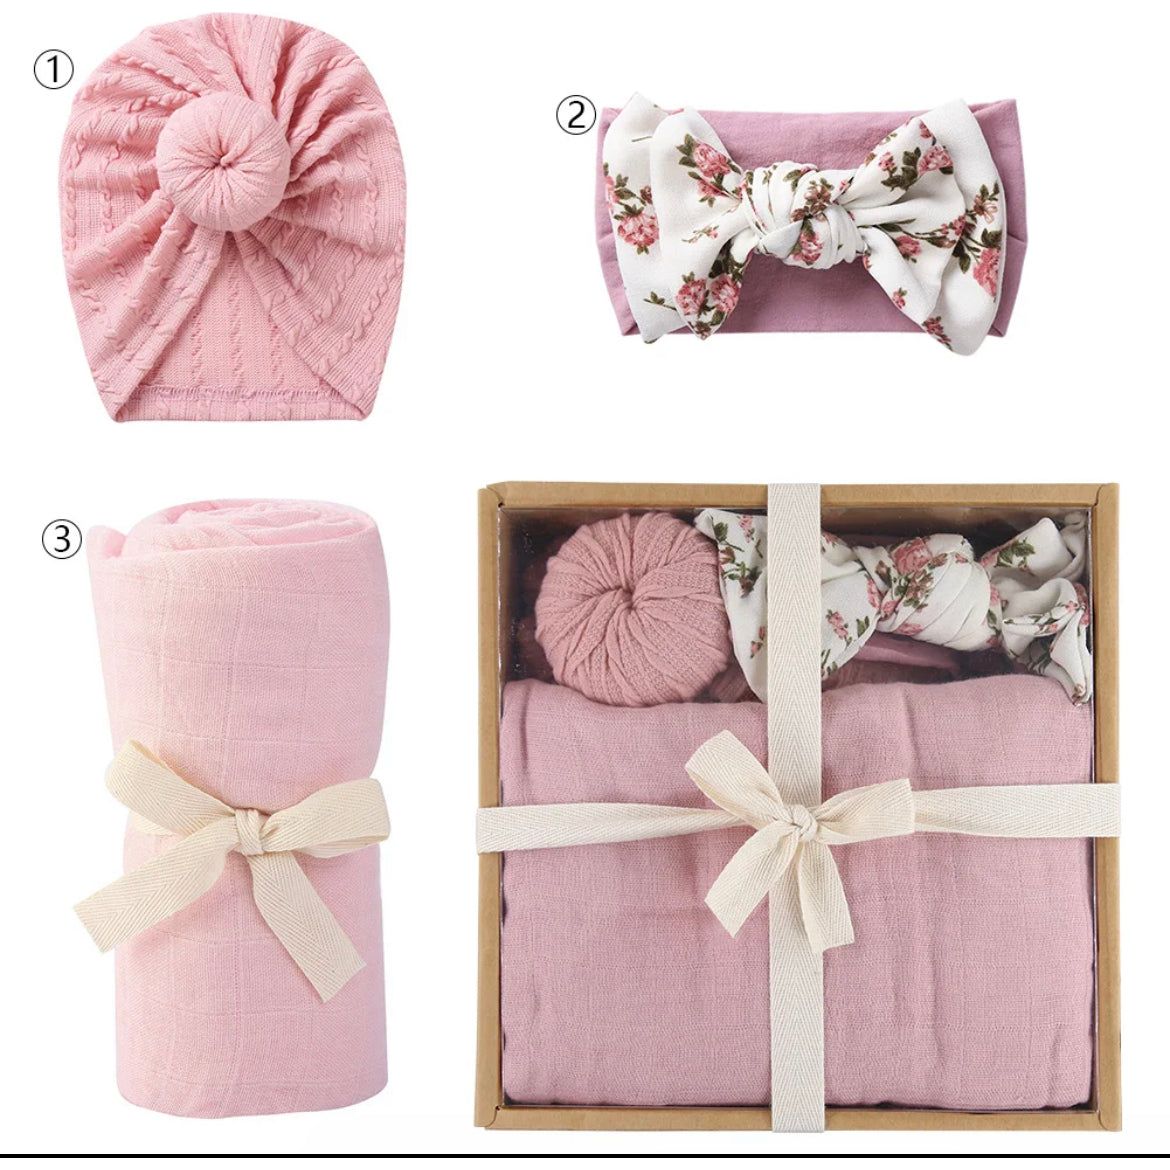 Pibi Infants Gift Set of 3 in a Box (Swaddle, Bowknot Hairband, Turban) Dp060 Assorted Age- Newborn to 12 Months